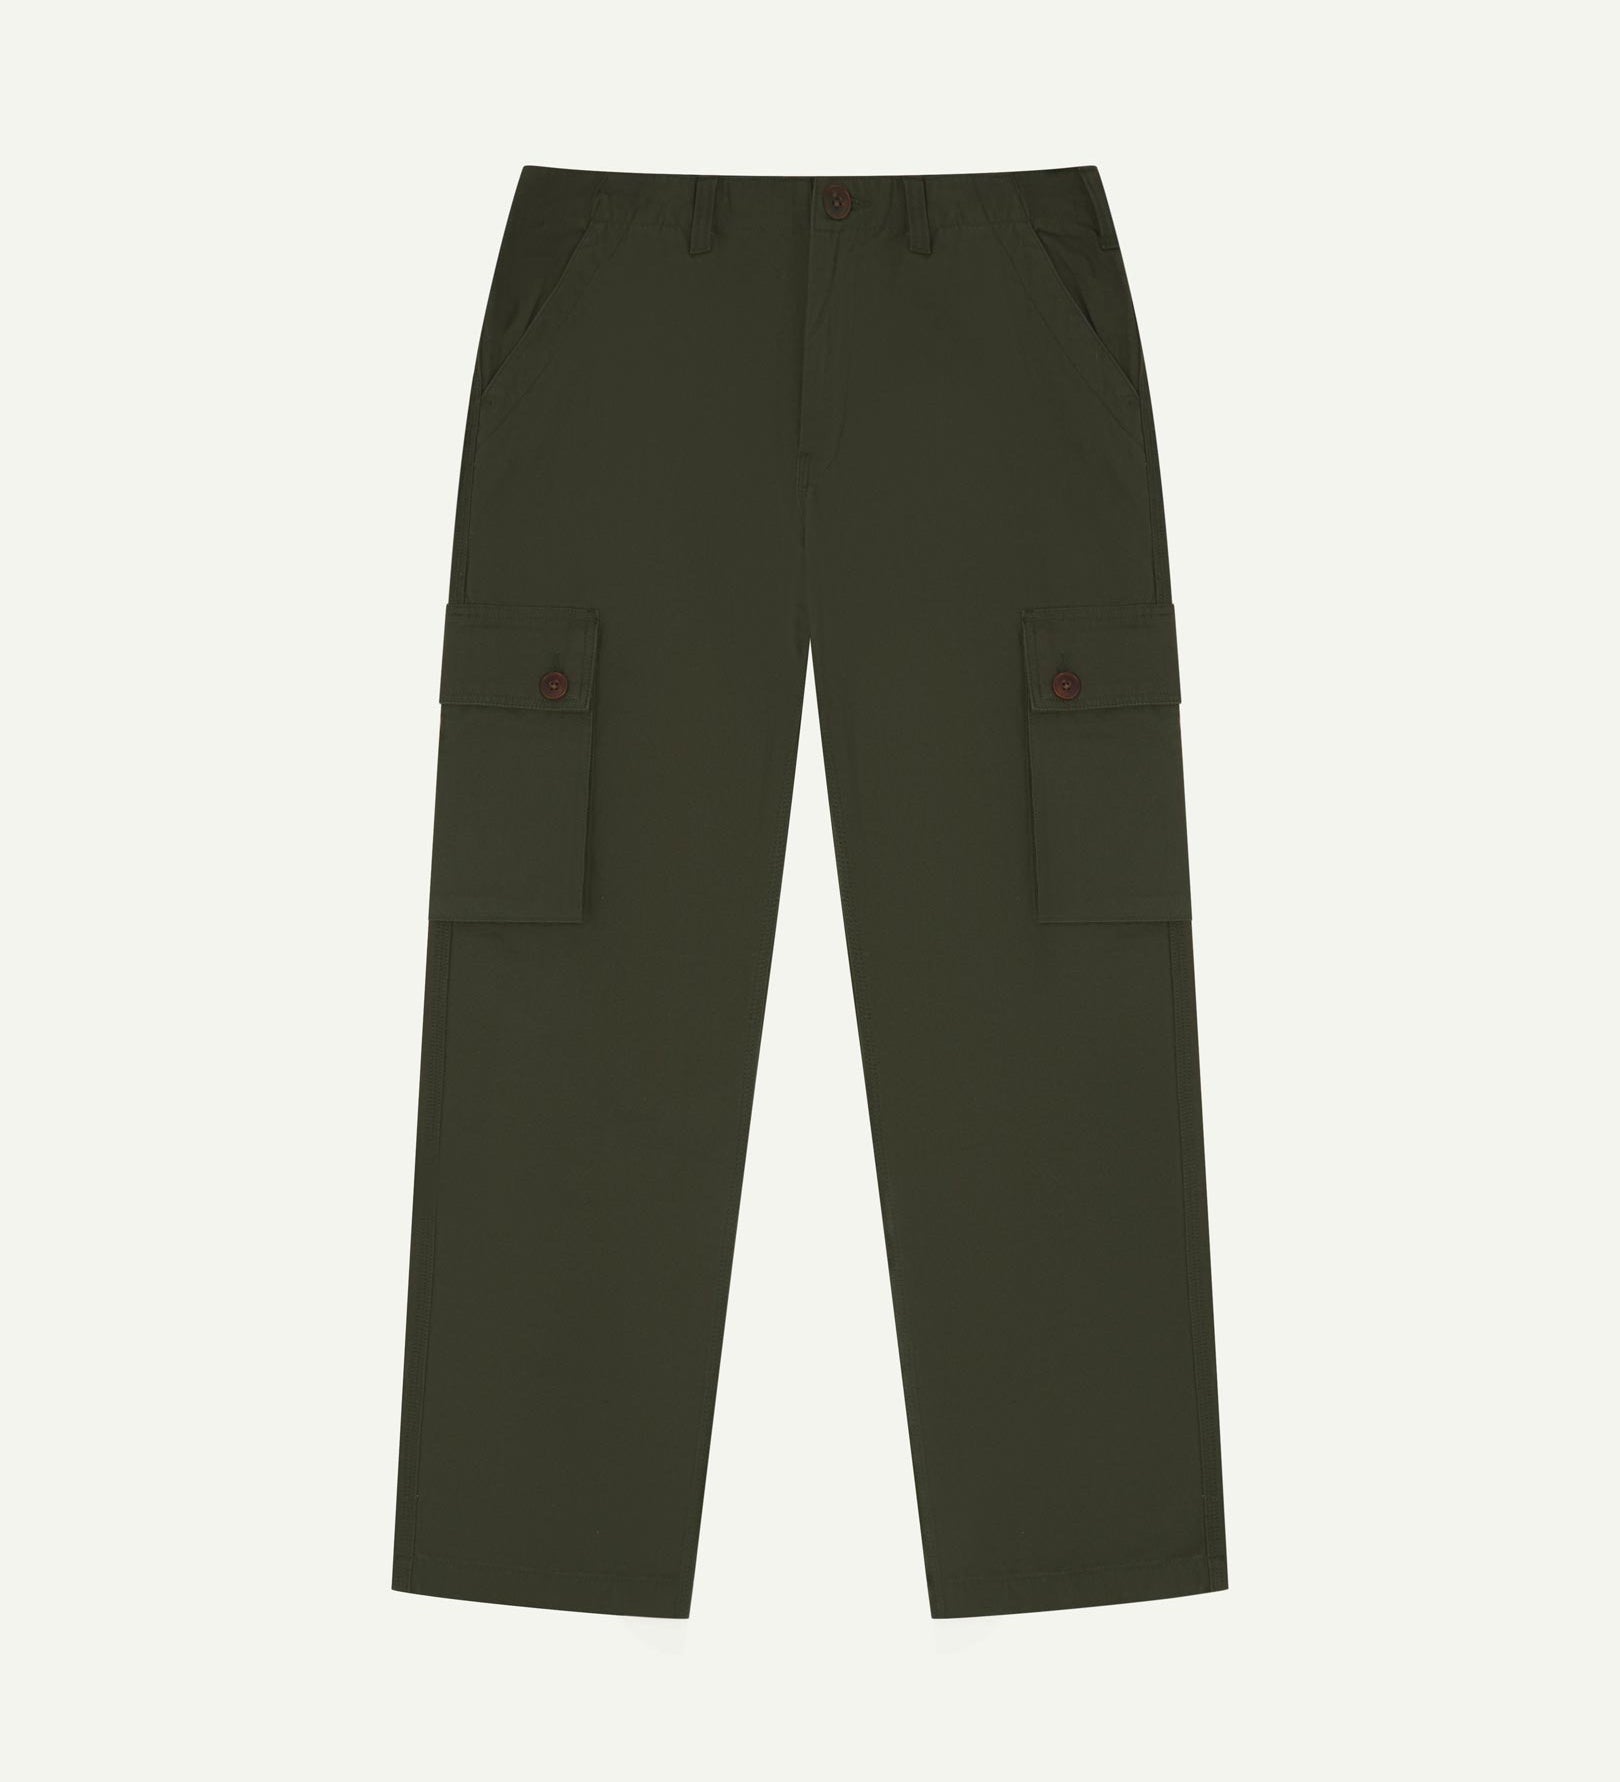 Flat front view of 5014 Uskees men's organic cotton vine green cargo trousers showing front pockets, cargo pockets and adjustable waistband